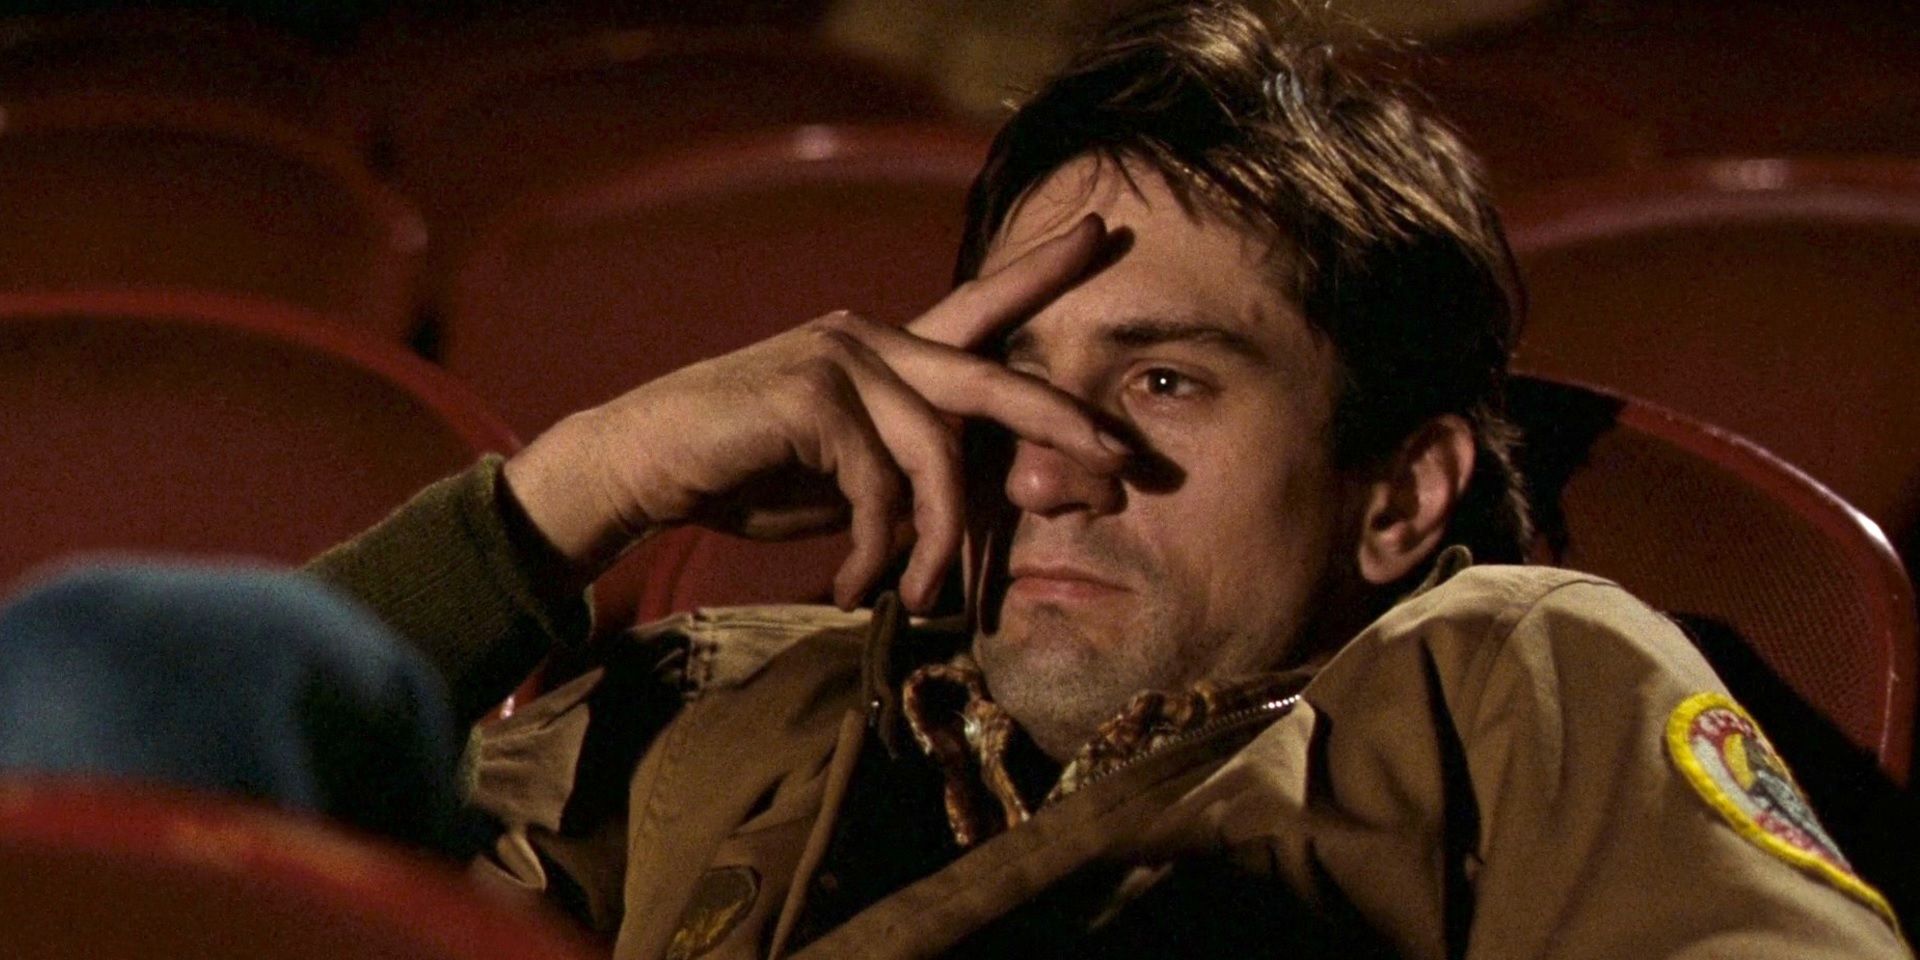 Is Travis Bickle Dead At The End Of Taxi Driver?